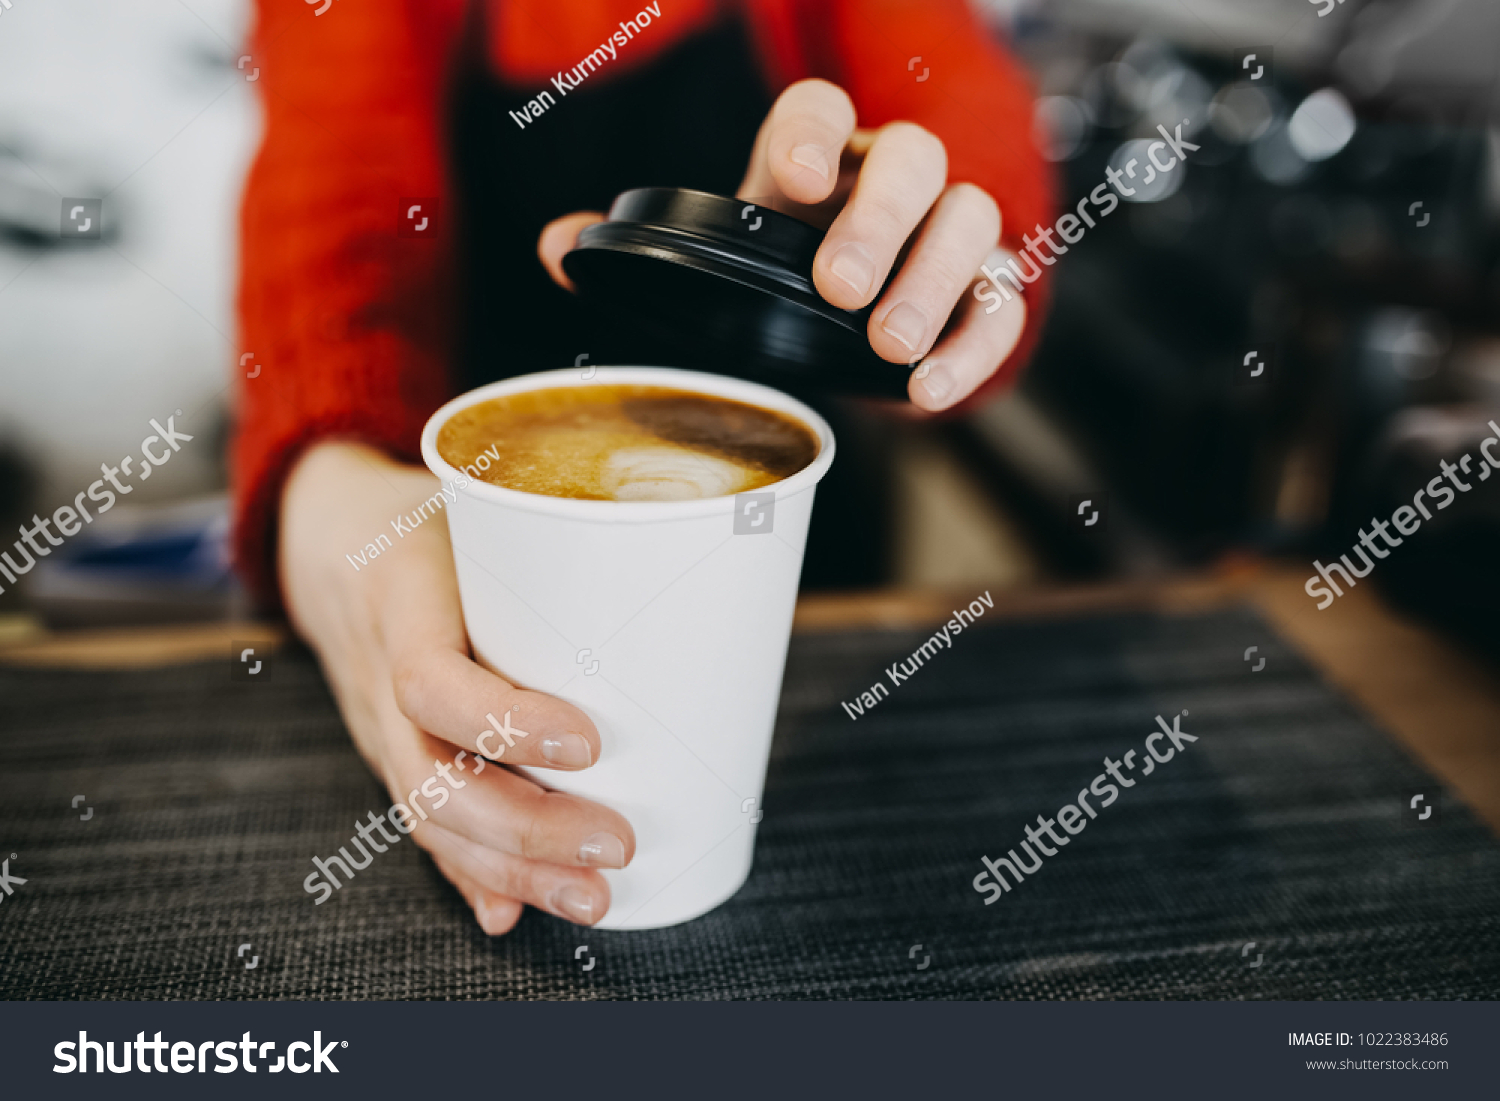 Barista in apron is holding in hands hot cappuccino in white takeaway paper cup. Coffee take away at cafe shop #1022383486